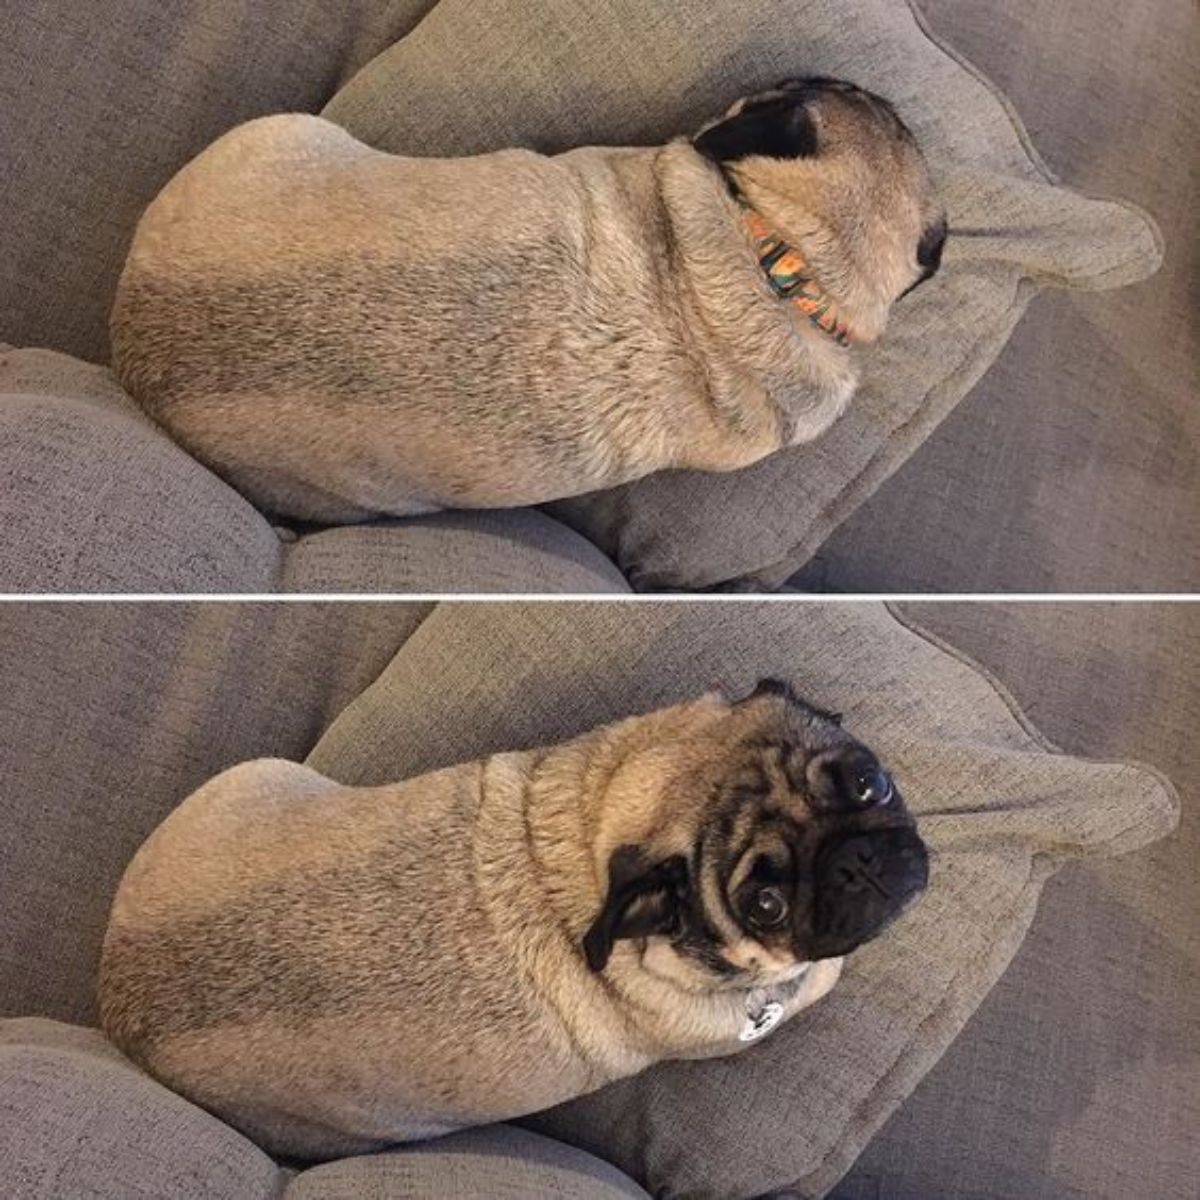 1 photo of a brown pug laying on a brown sofa and 1 photo of the pug looking up